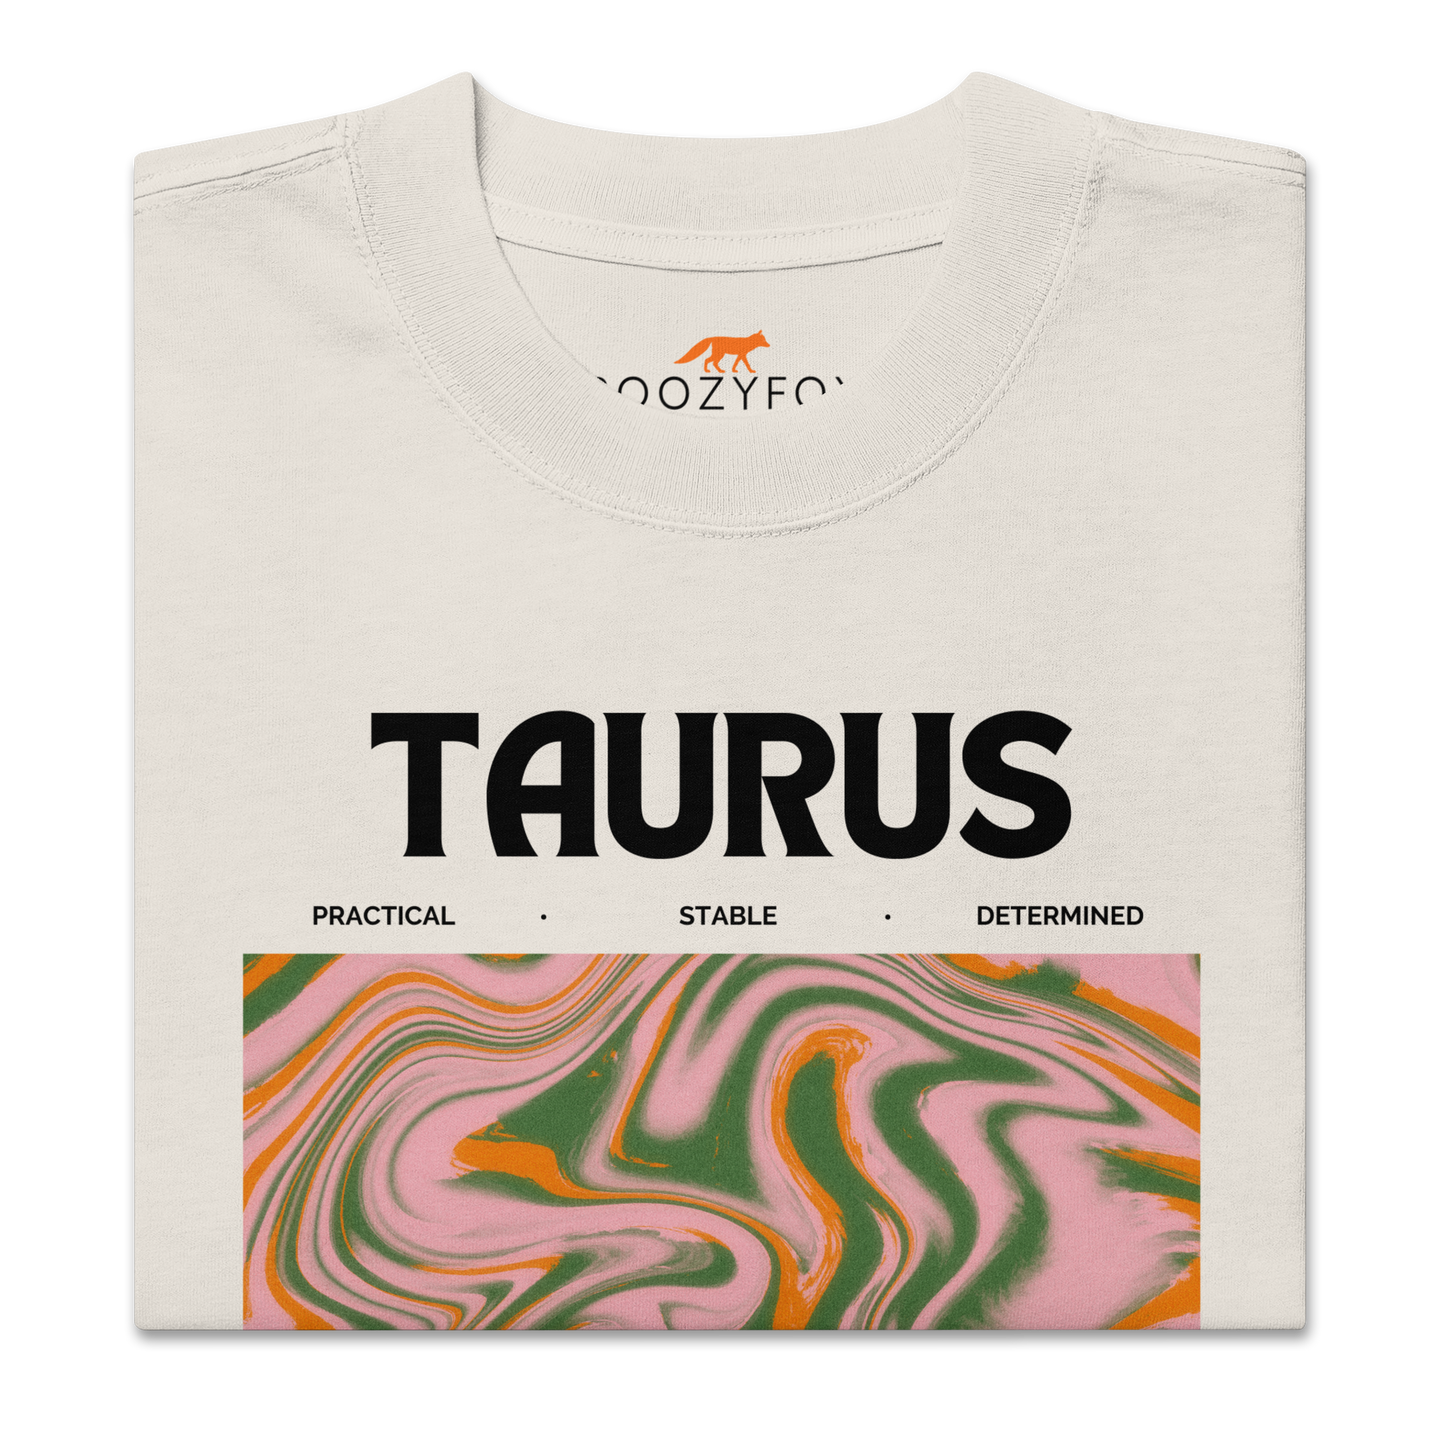 Front details of a Faded Bone Taurus Oversized T-Shirt featuring an Abstract Taurus Star Sign graphic on the chest - Cool Graphic Zodiac Oversized Tees - Boozy Fox